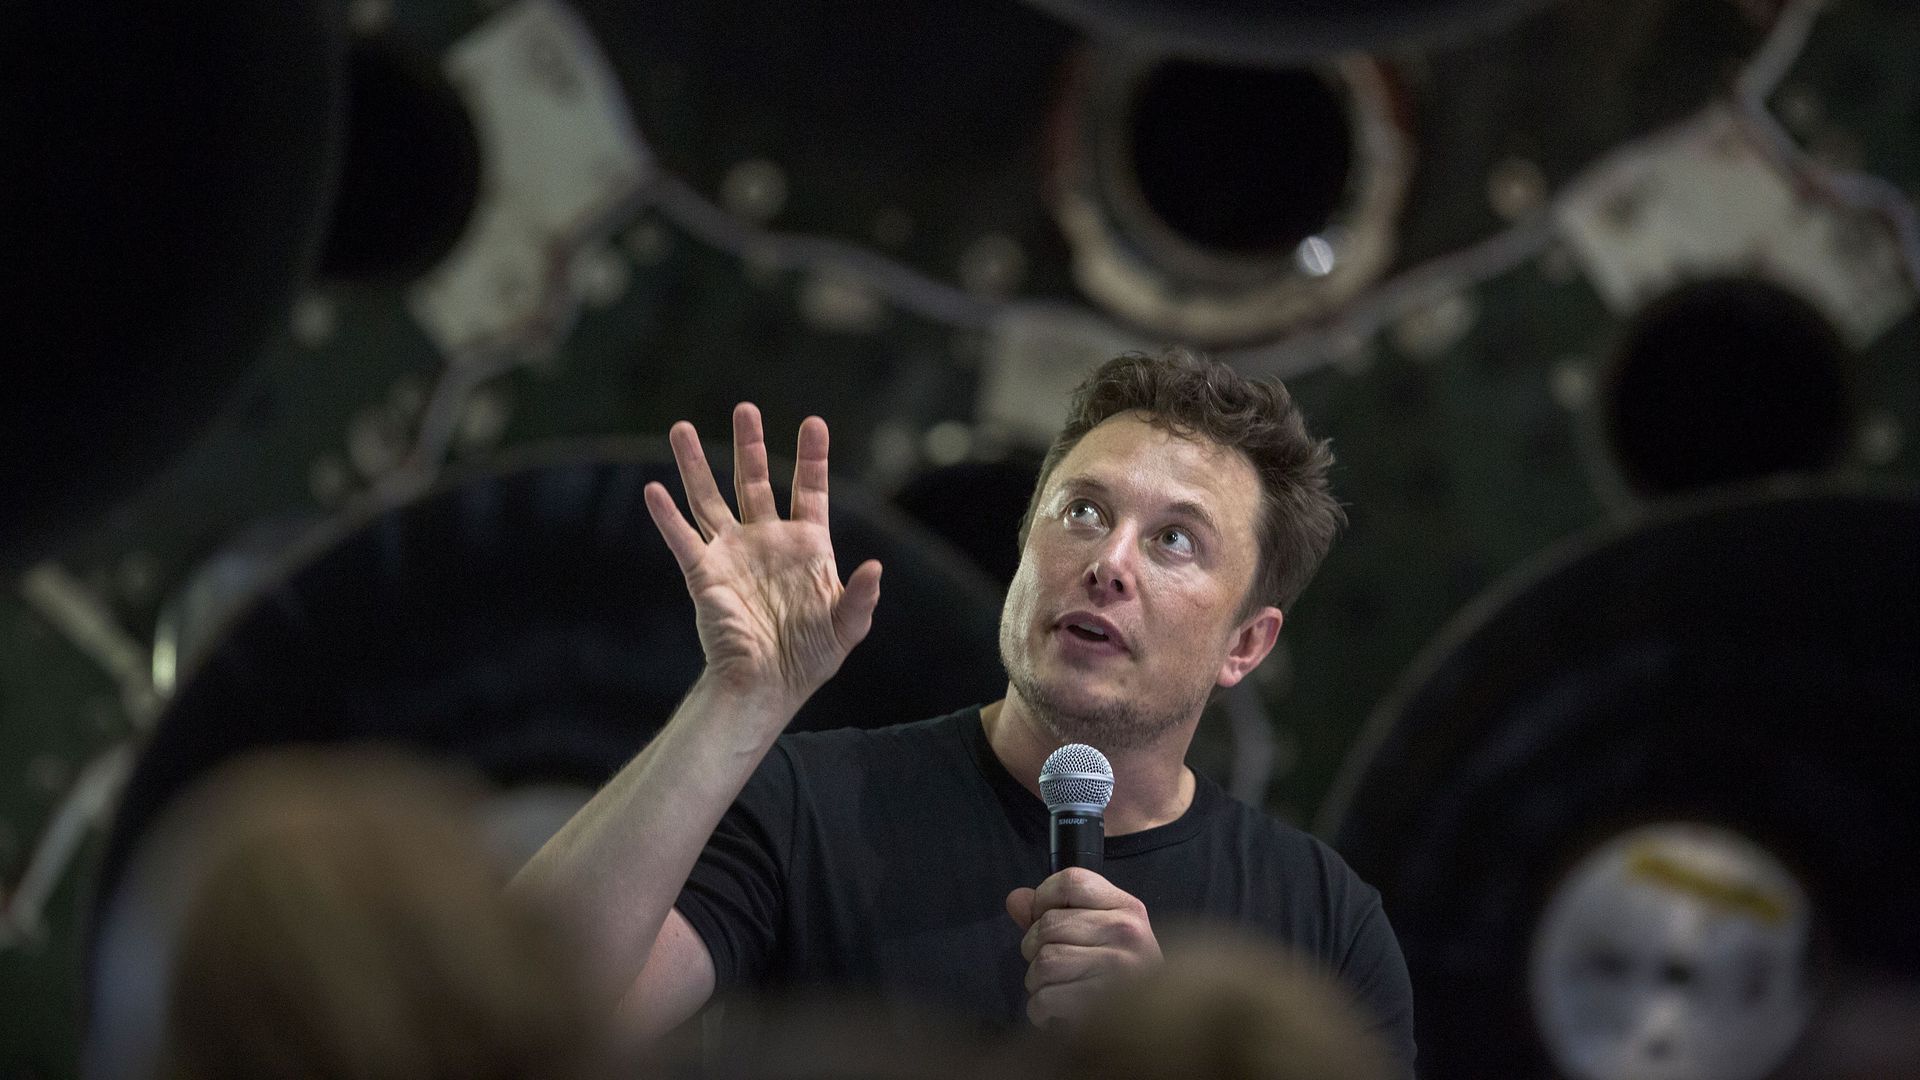  Why Elon Musk's plan for global internet access annoyed astronomers 